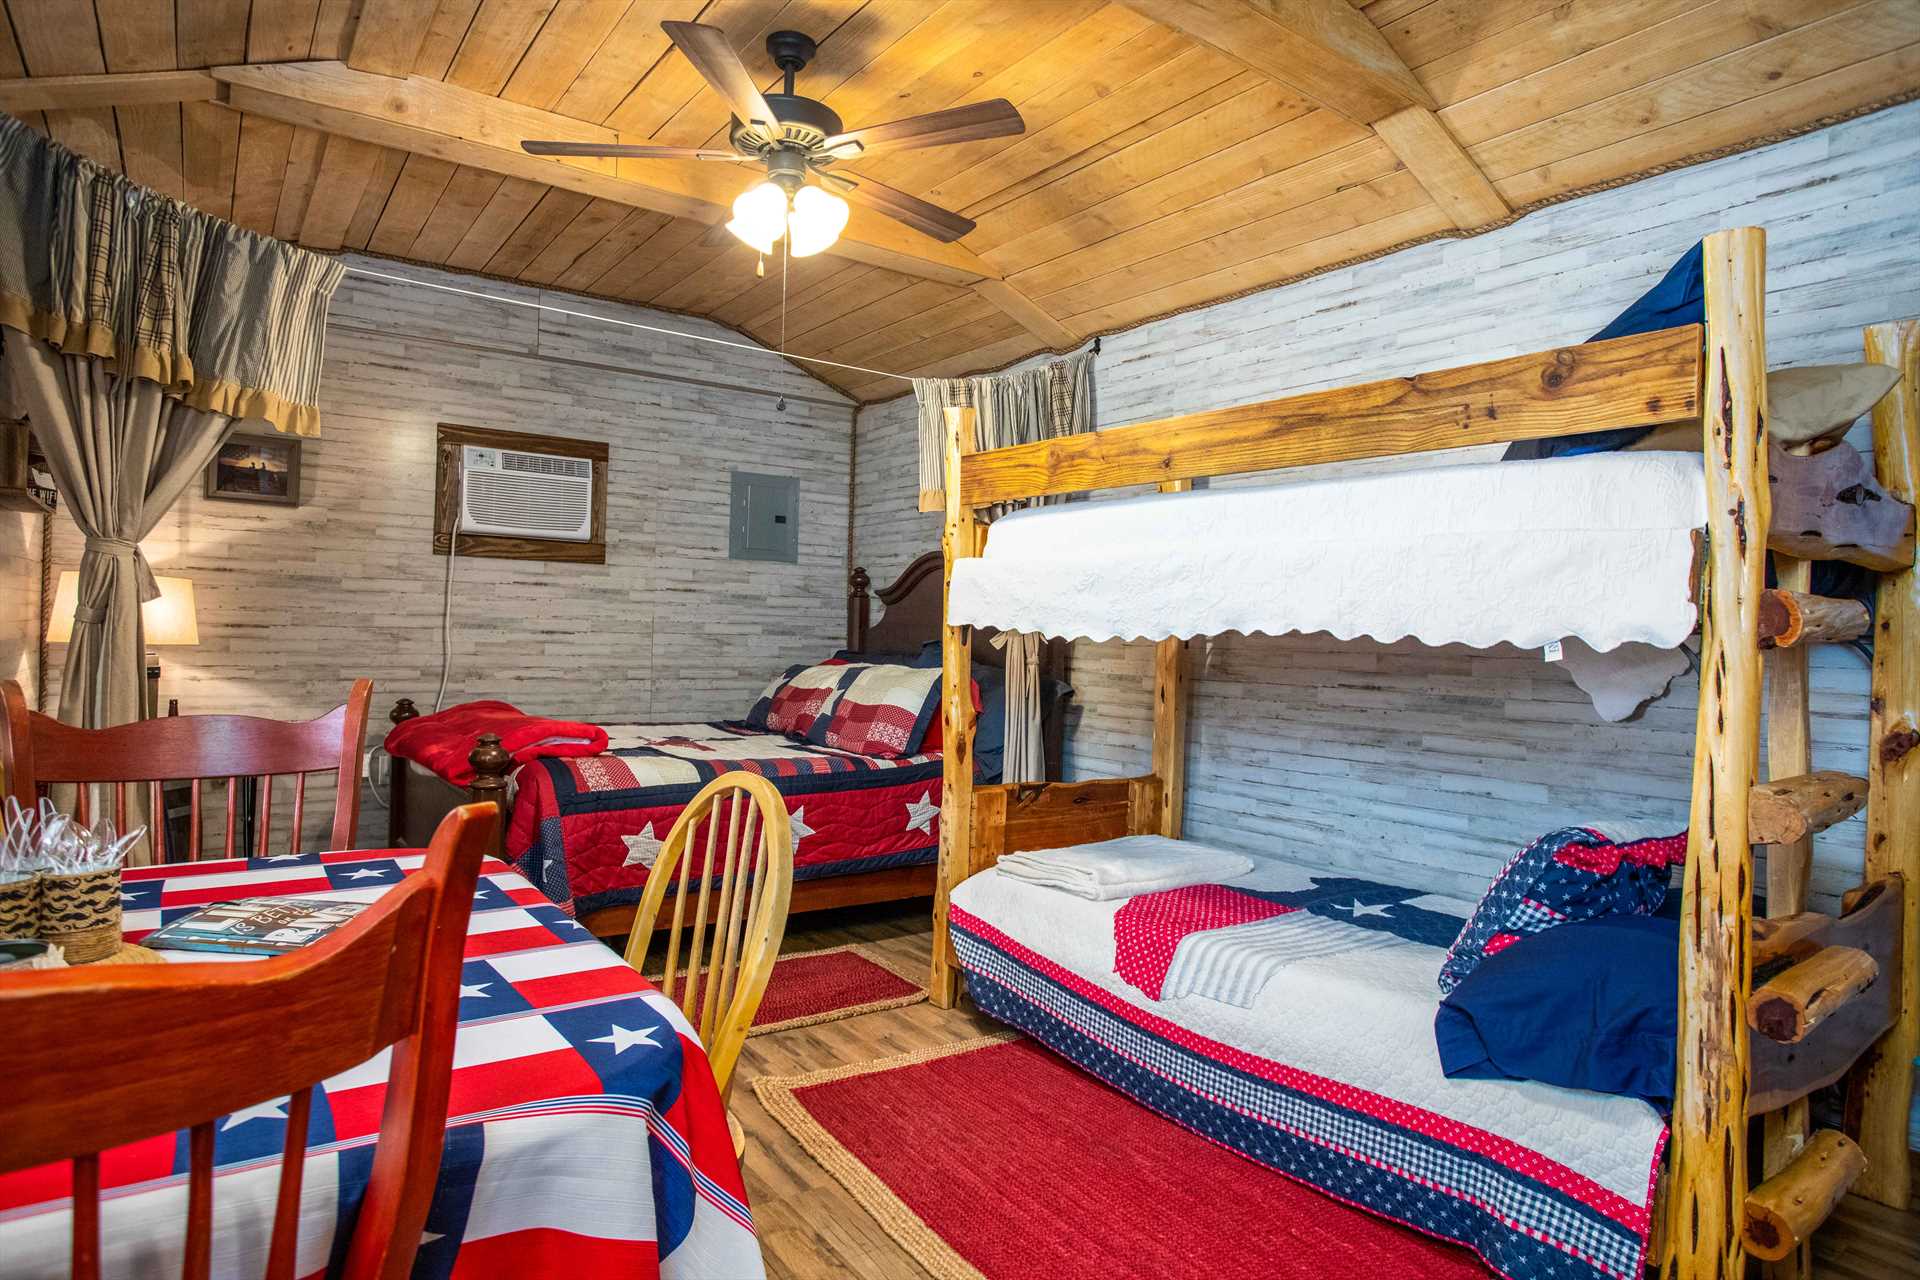                                                 A star-spangled queen-sized bed, and two twin bunks, provide restful sleep for up to four! All beds come with clean linens, too.